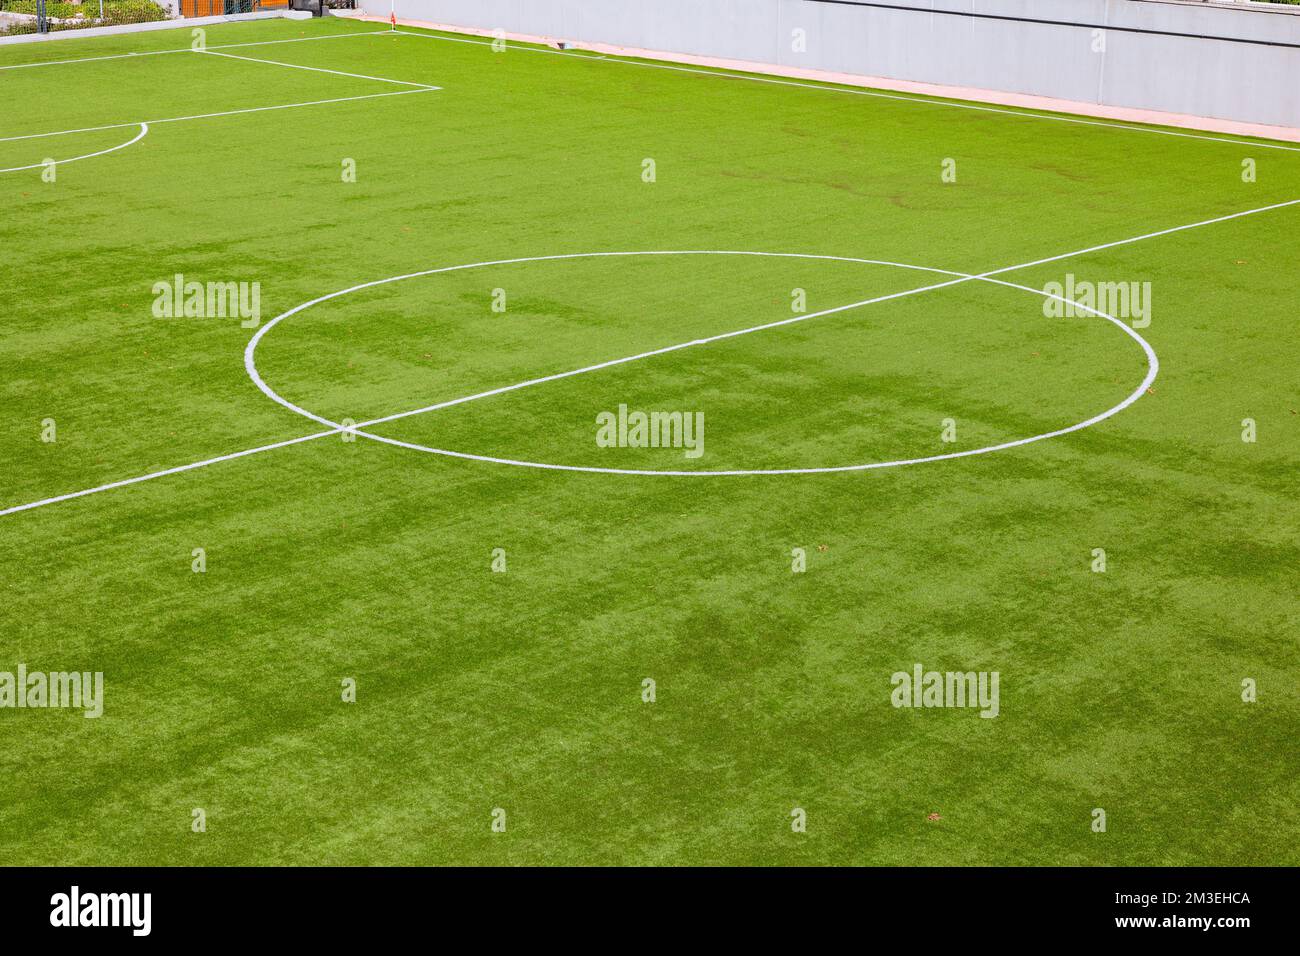 Soccer or football field. Center circle and halfway line of a soccer field. Football background photo. Stock Photo